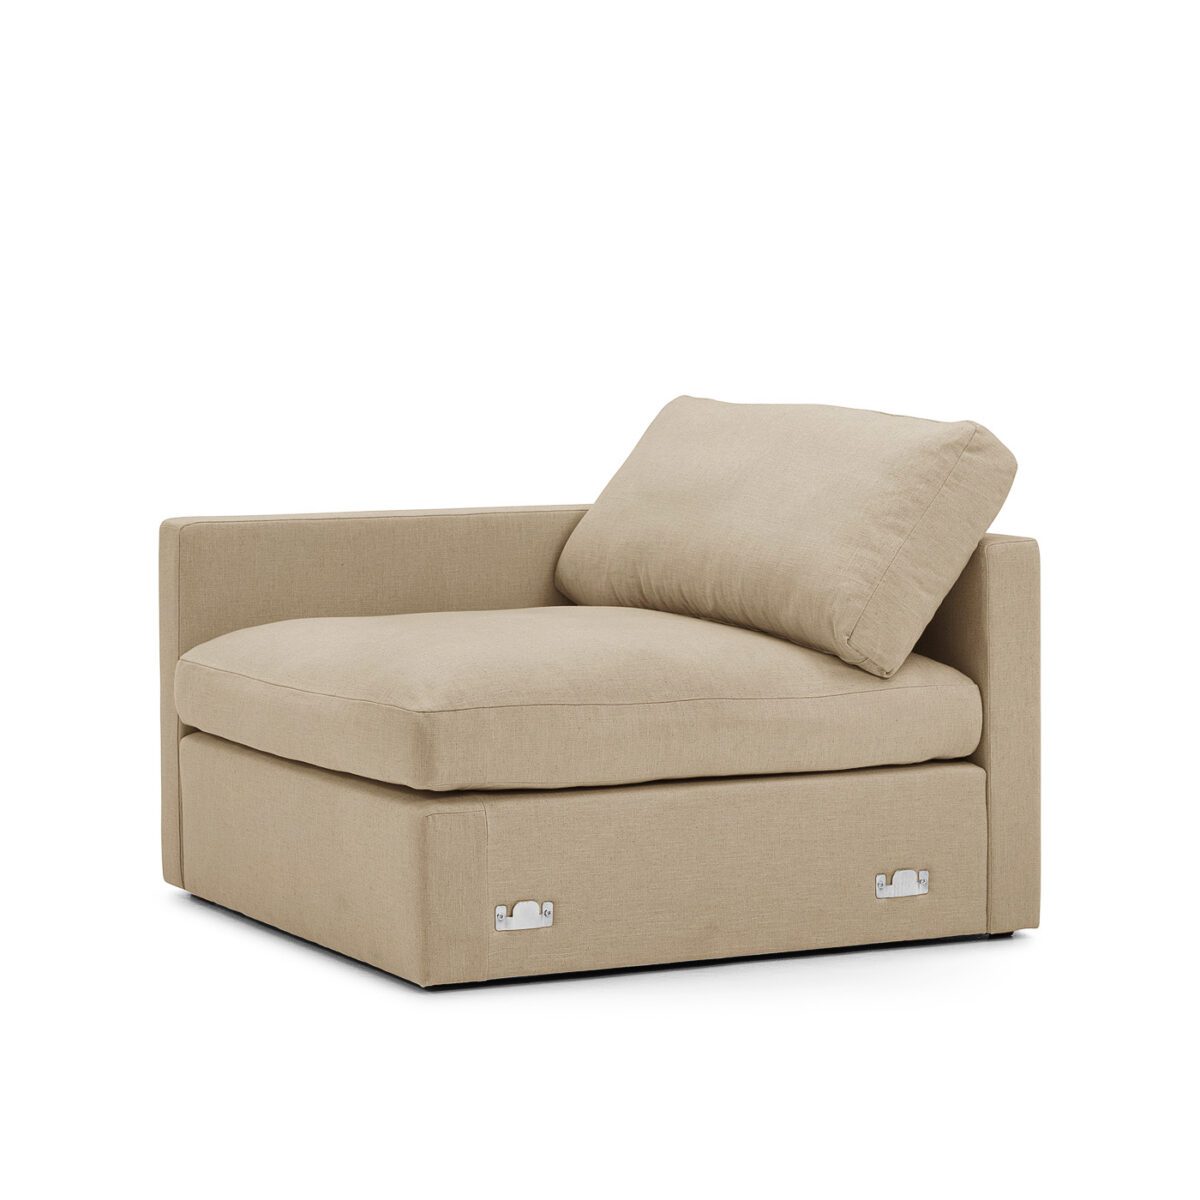 Lucie Grande 2-Seat Sofa (Without Armrests) Khaki